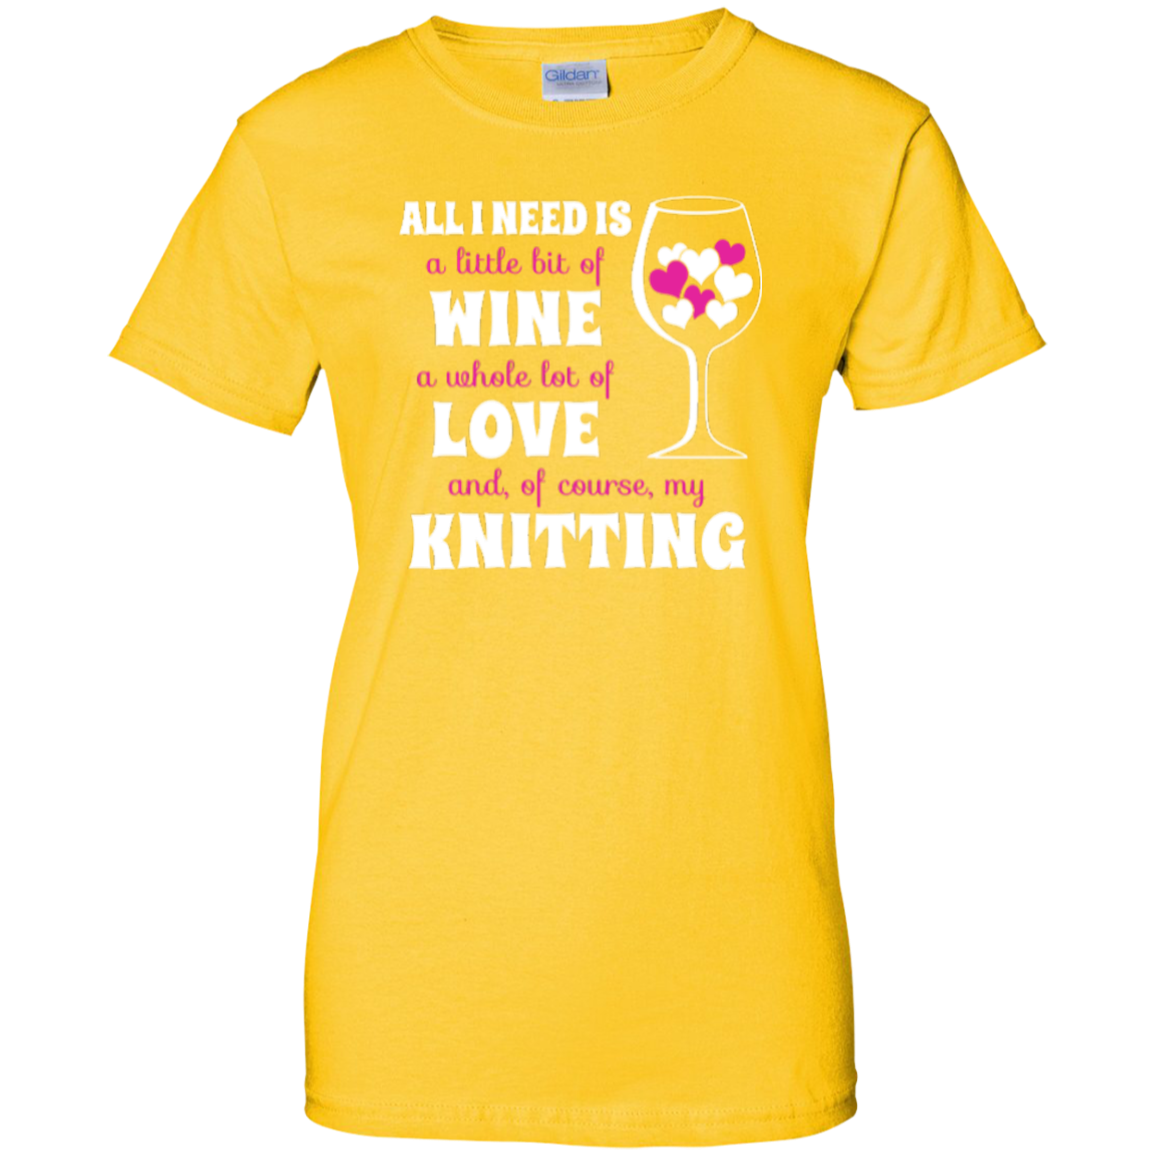 All I Need is Wine-Love-Knitting Ladies Custom 100% Cotton T-Shirt - Crafter4Life - 4